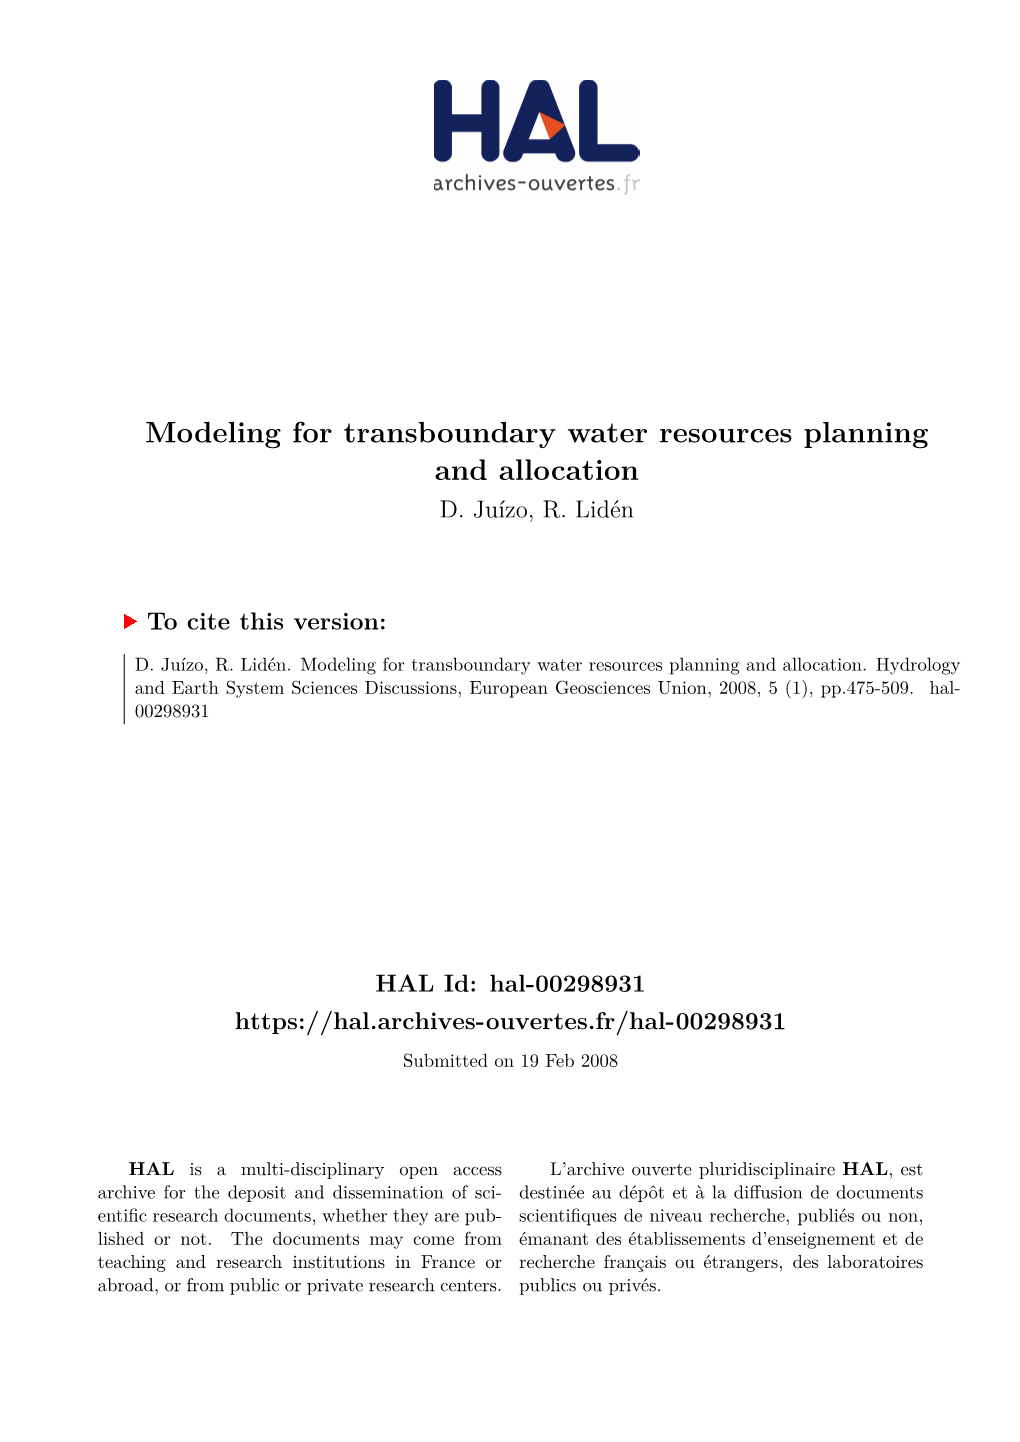 Modeling for Transboundary Water Resources Planning and Allocation D